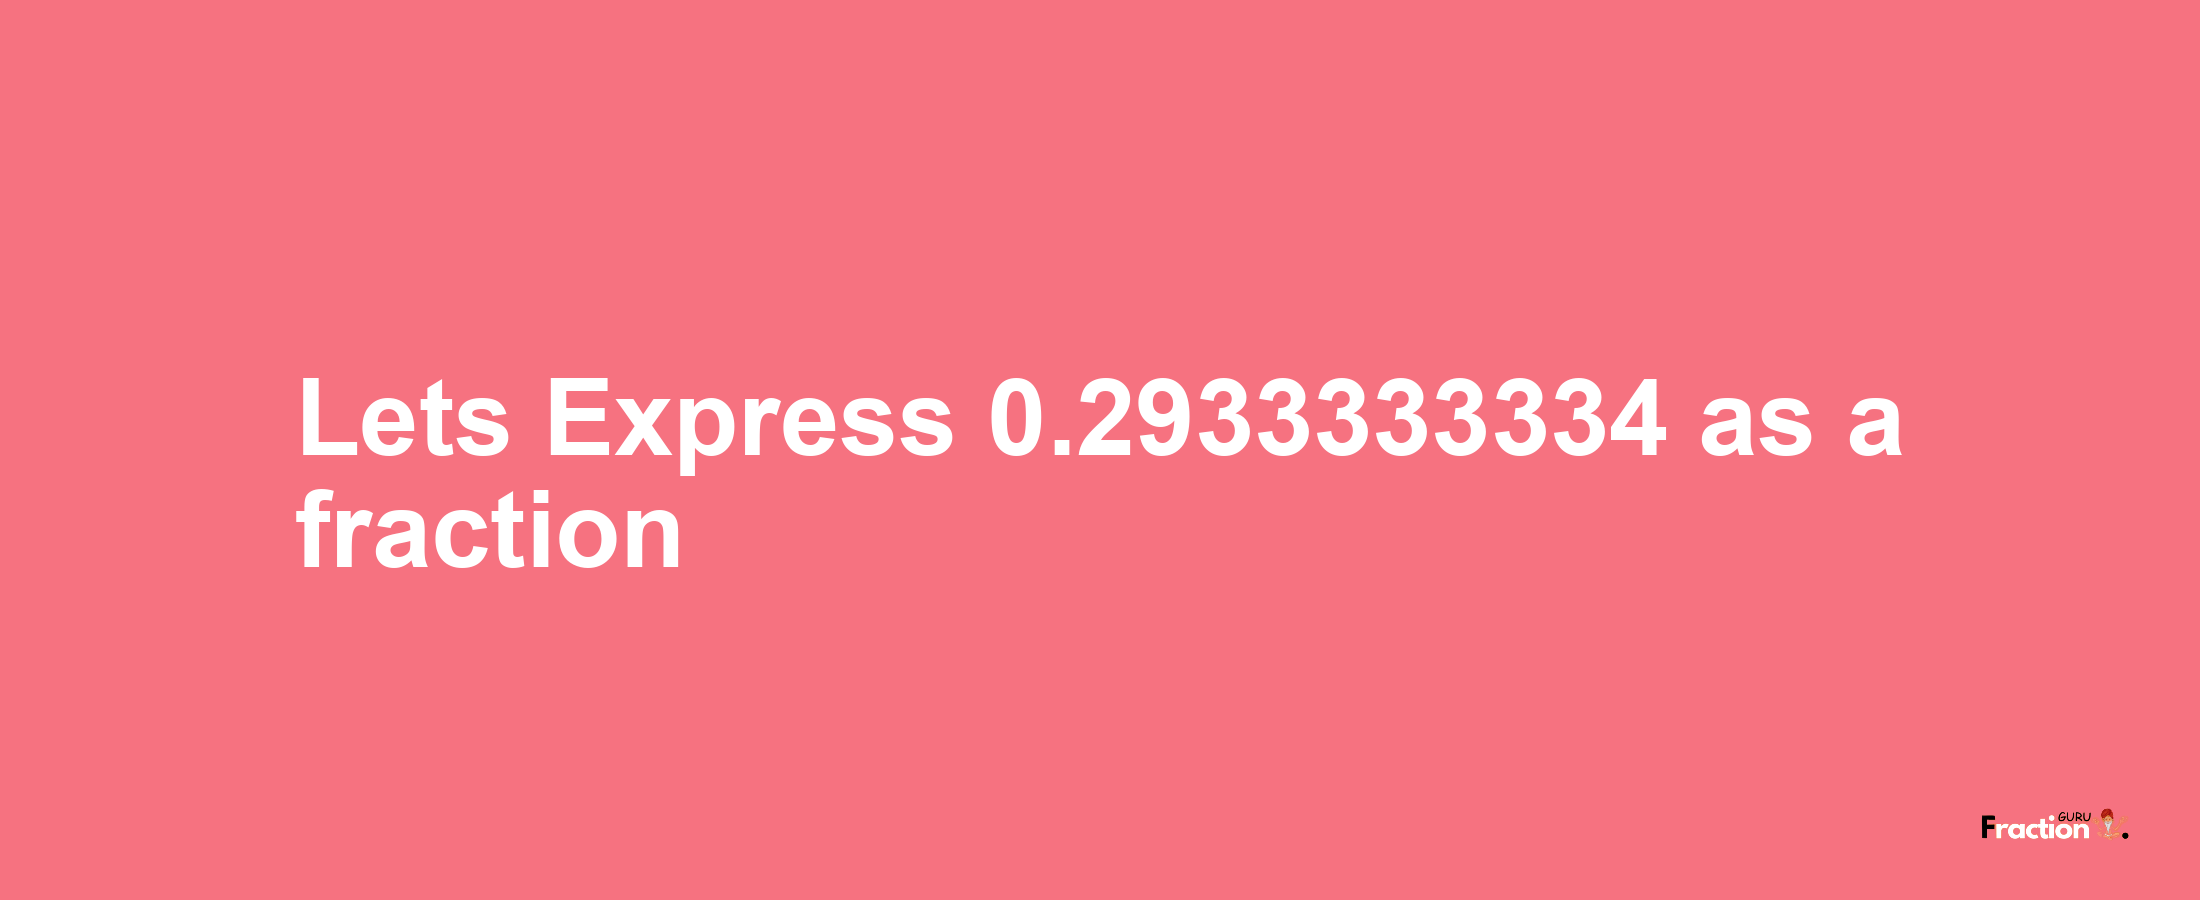 Lets Express 0.2933333334 as afraction